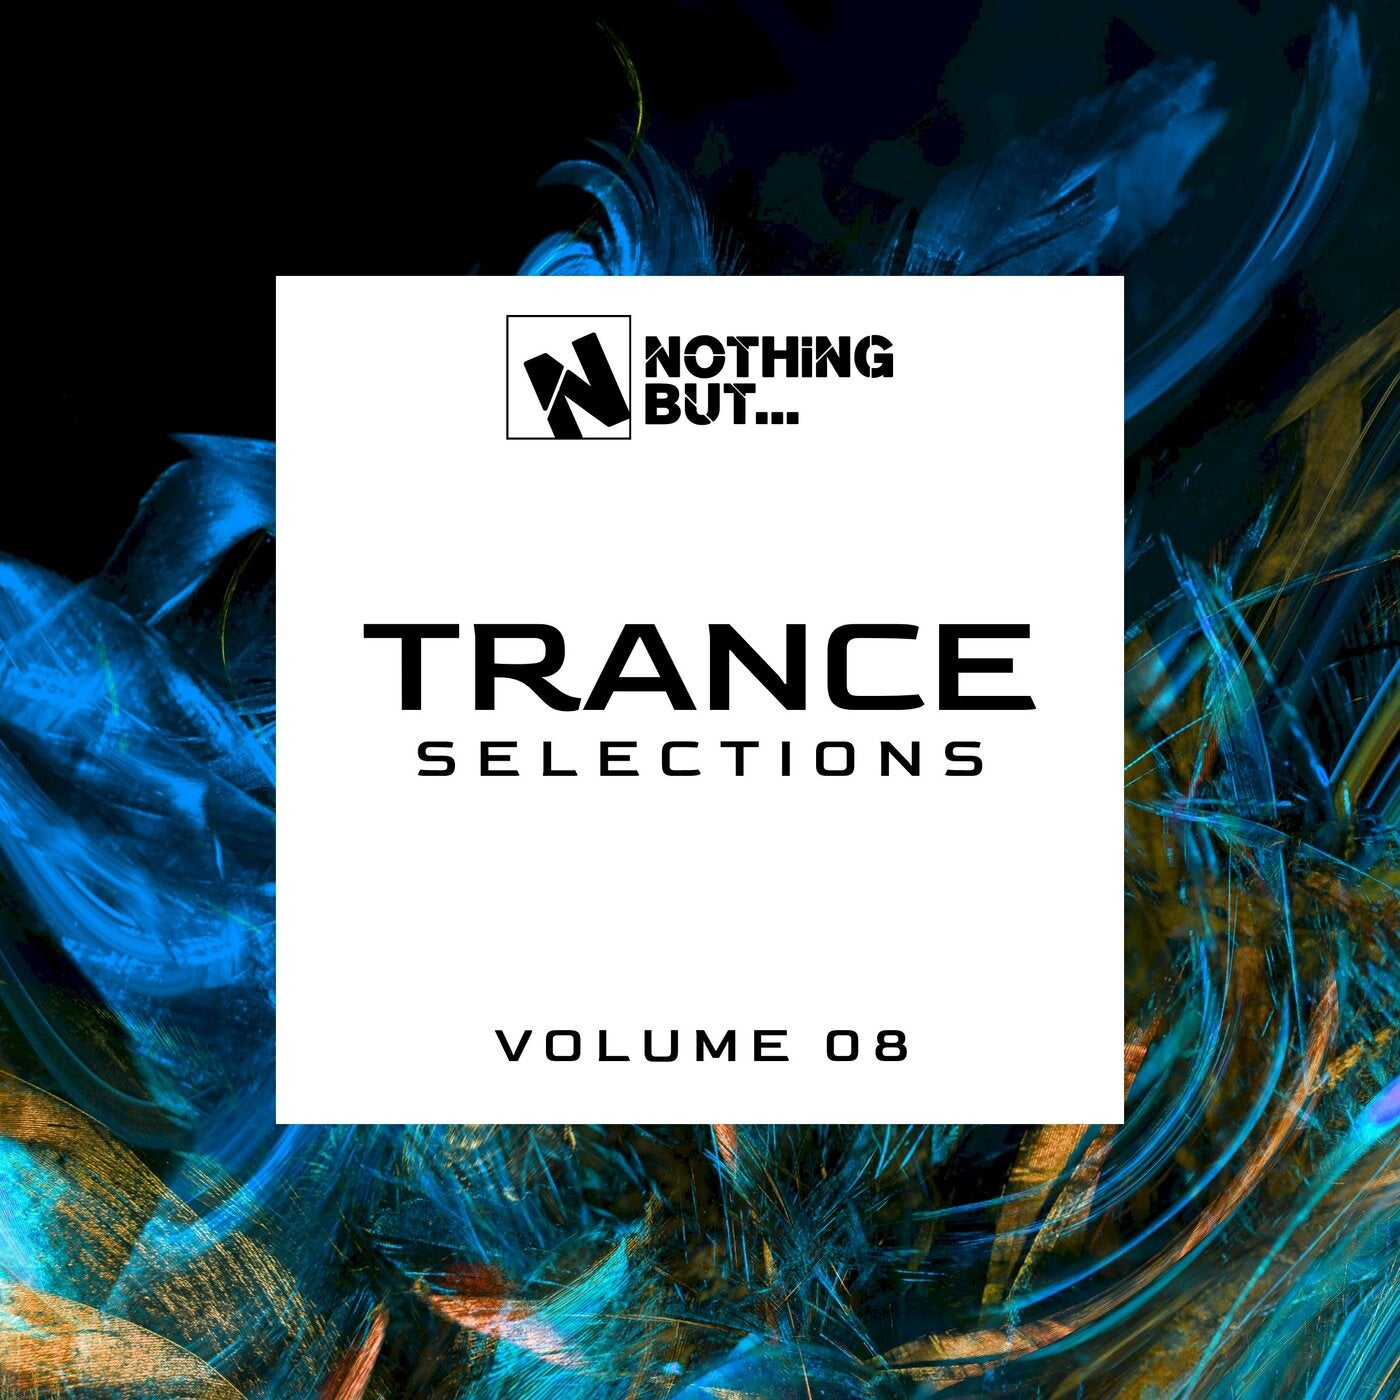 Nothing But... Trance Selections, Vol. 08